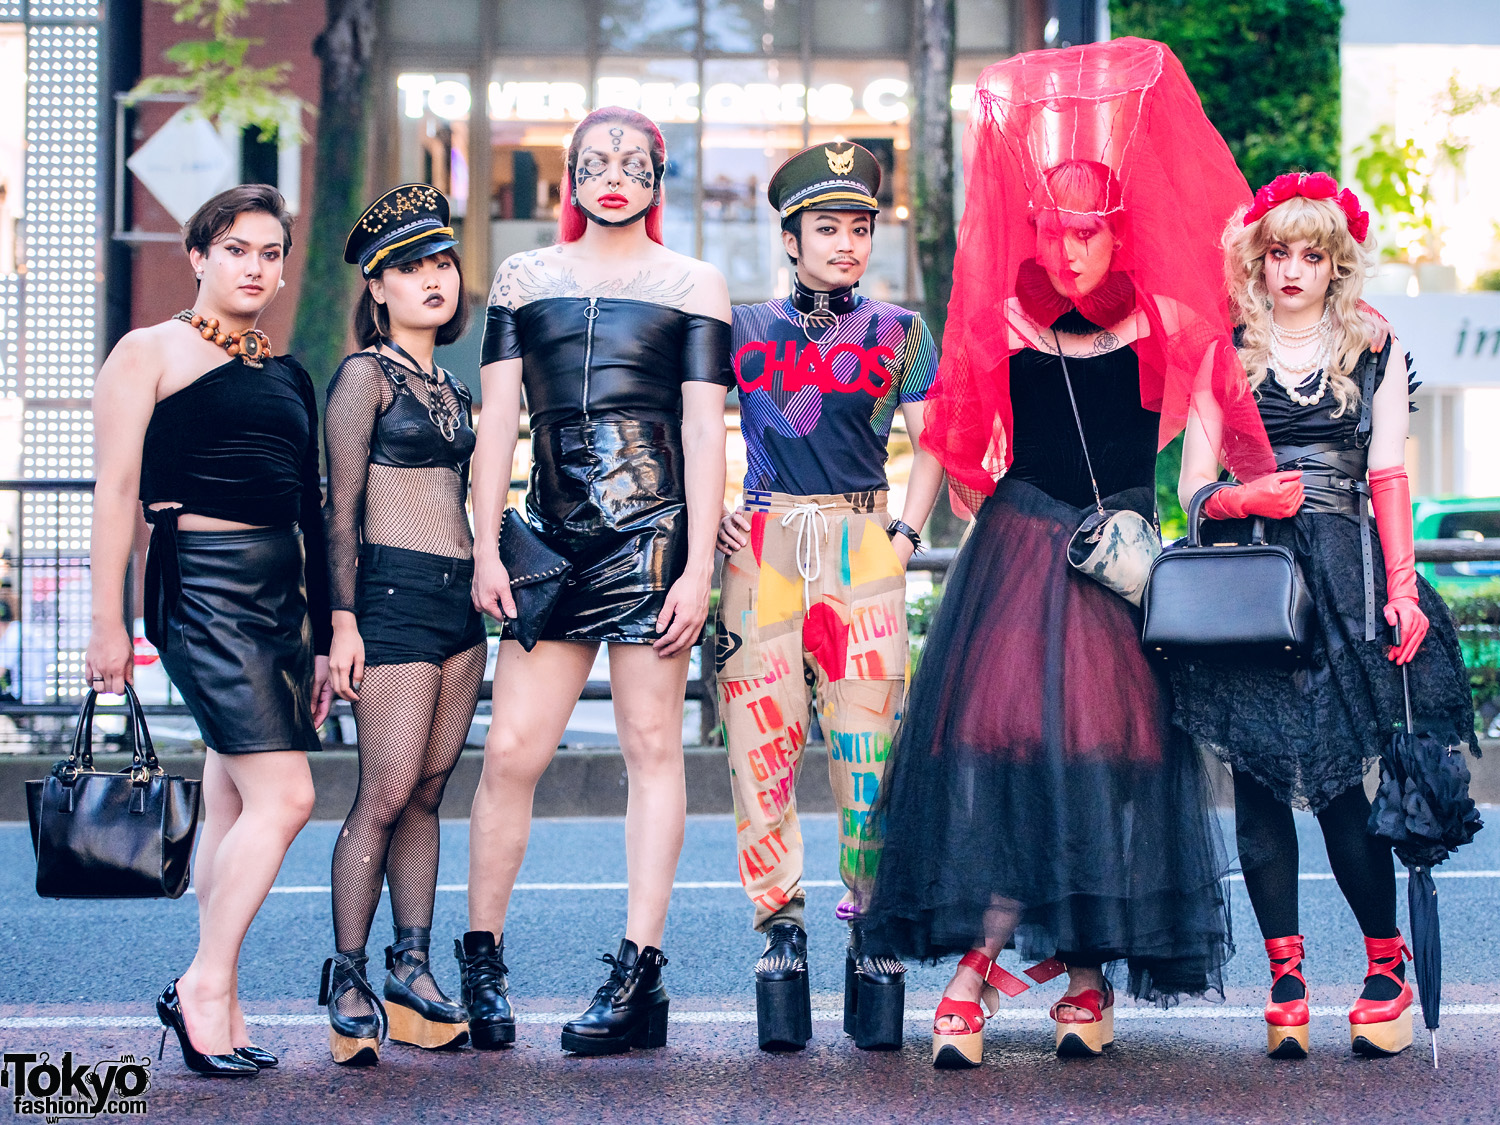 Avant-Garde Harajuku Street Styles w/ Iconic Vivienne Westwood Rocking Horse Shoes, Anglomania Chaos Top, Vintage Satchel, Red Veil, Wire Crown, Monster Shoes & Floral Headpiece